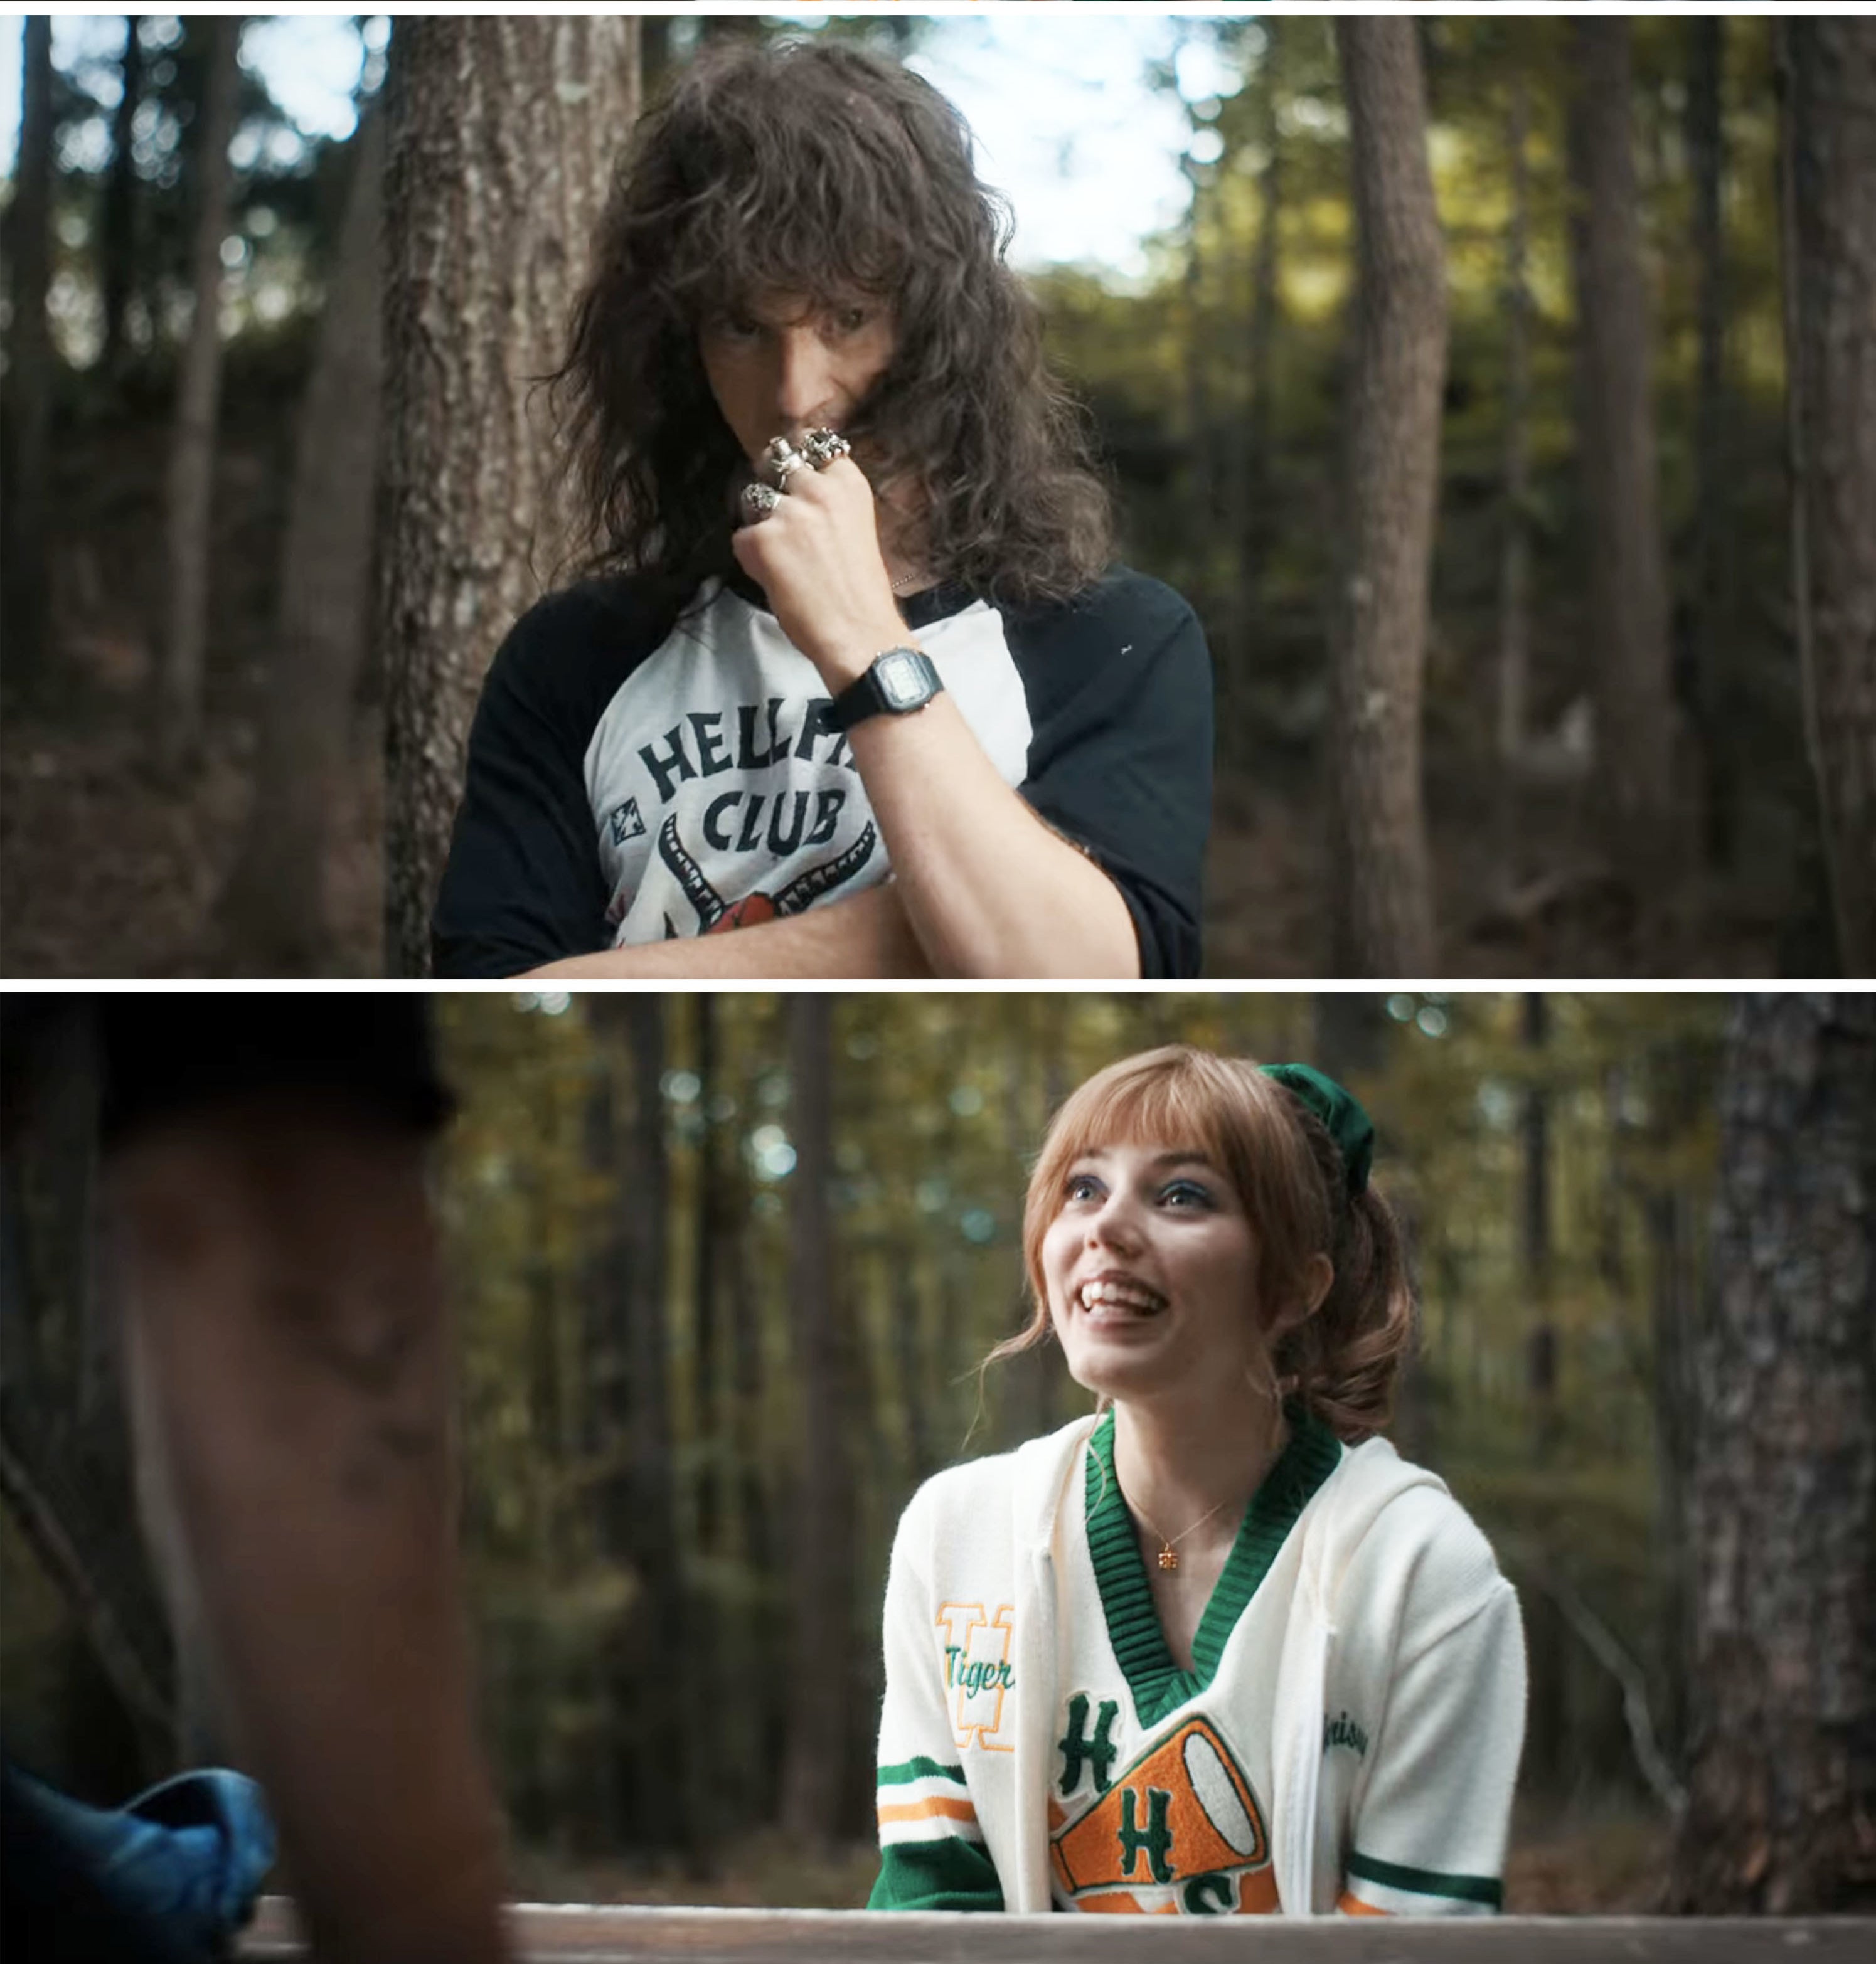 Eddie and Chrissy talking and smiling at each other in the woods